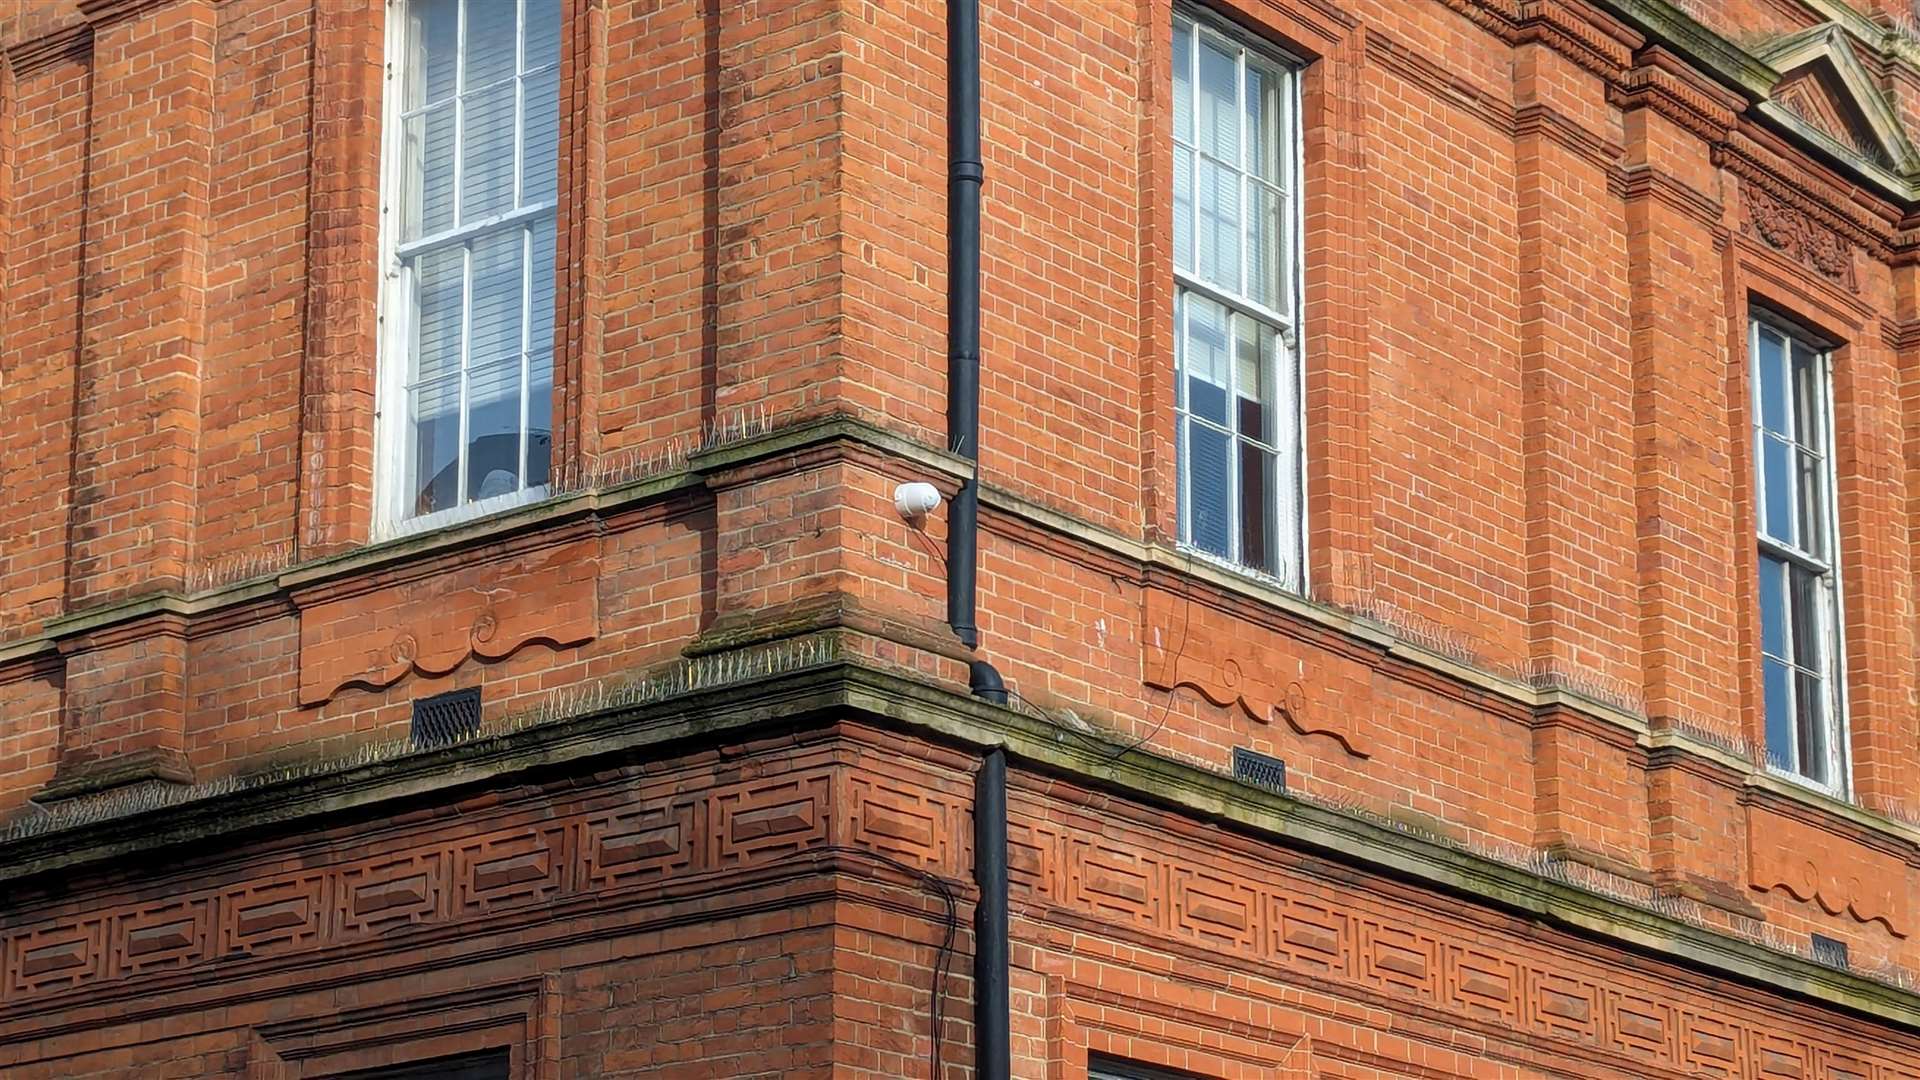 Historic England is calling for the CCTV cameras to be painted to match the colour of the building